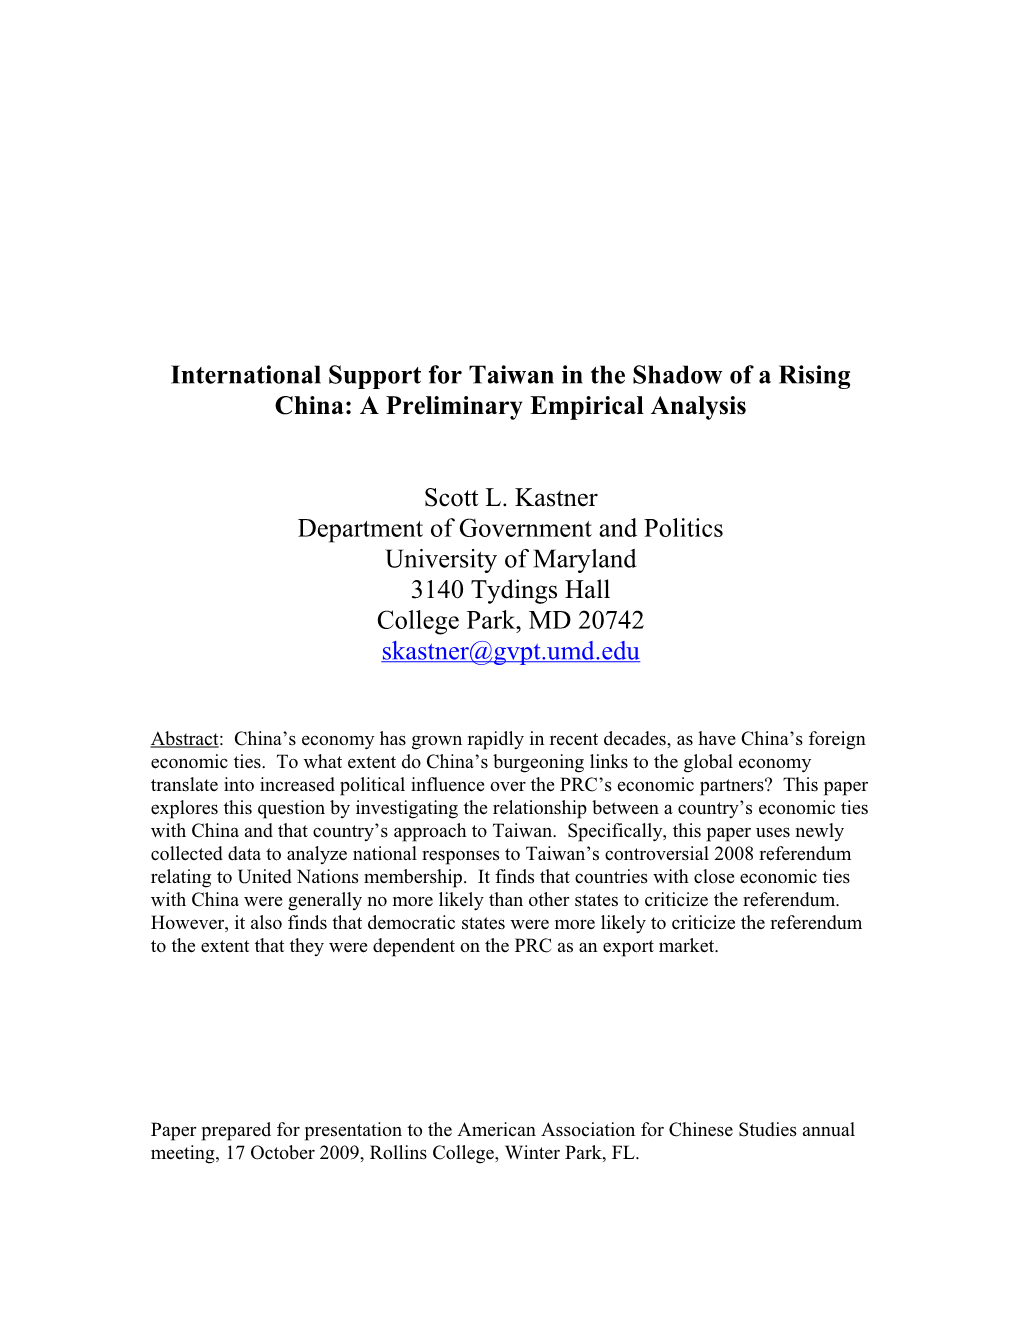 International Support for Taiwan in the Shadow of a Rising China: a Preliminary Empirical